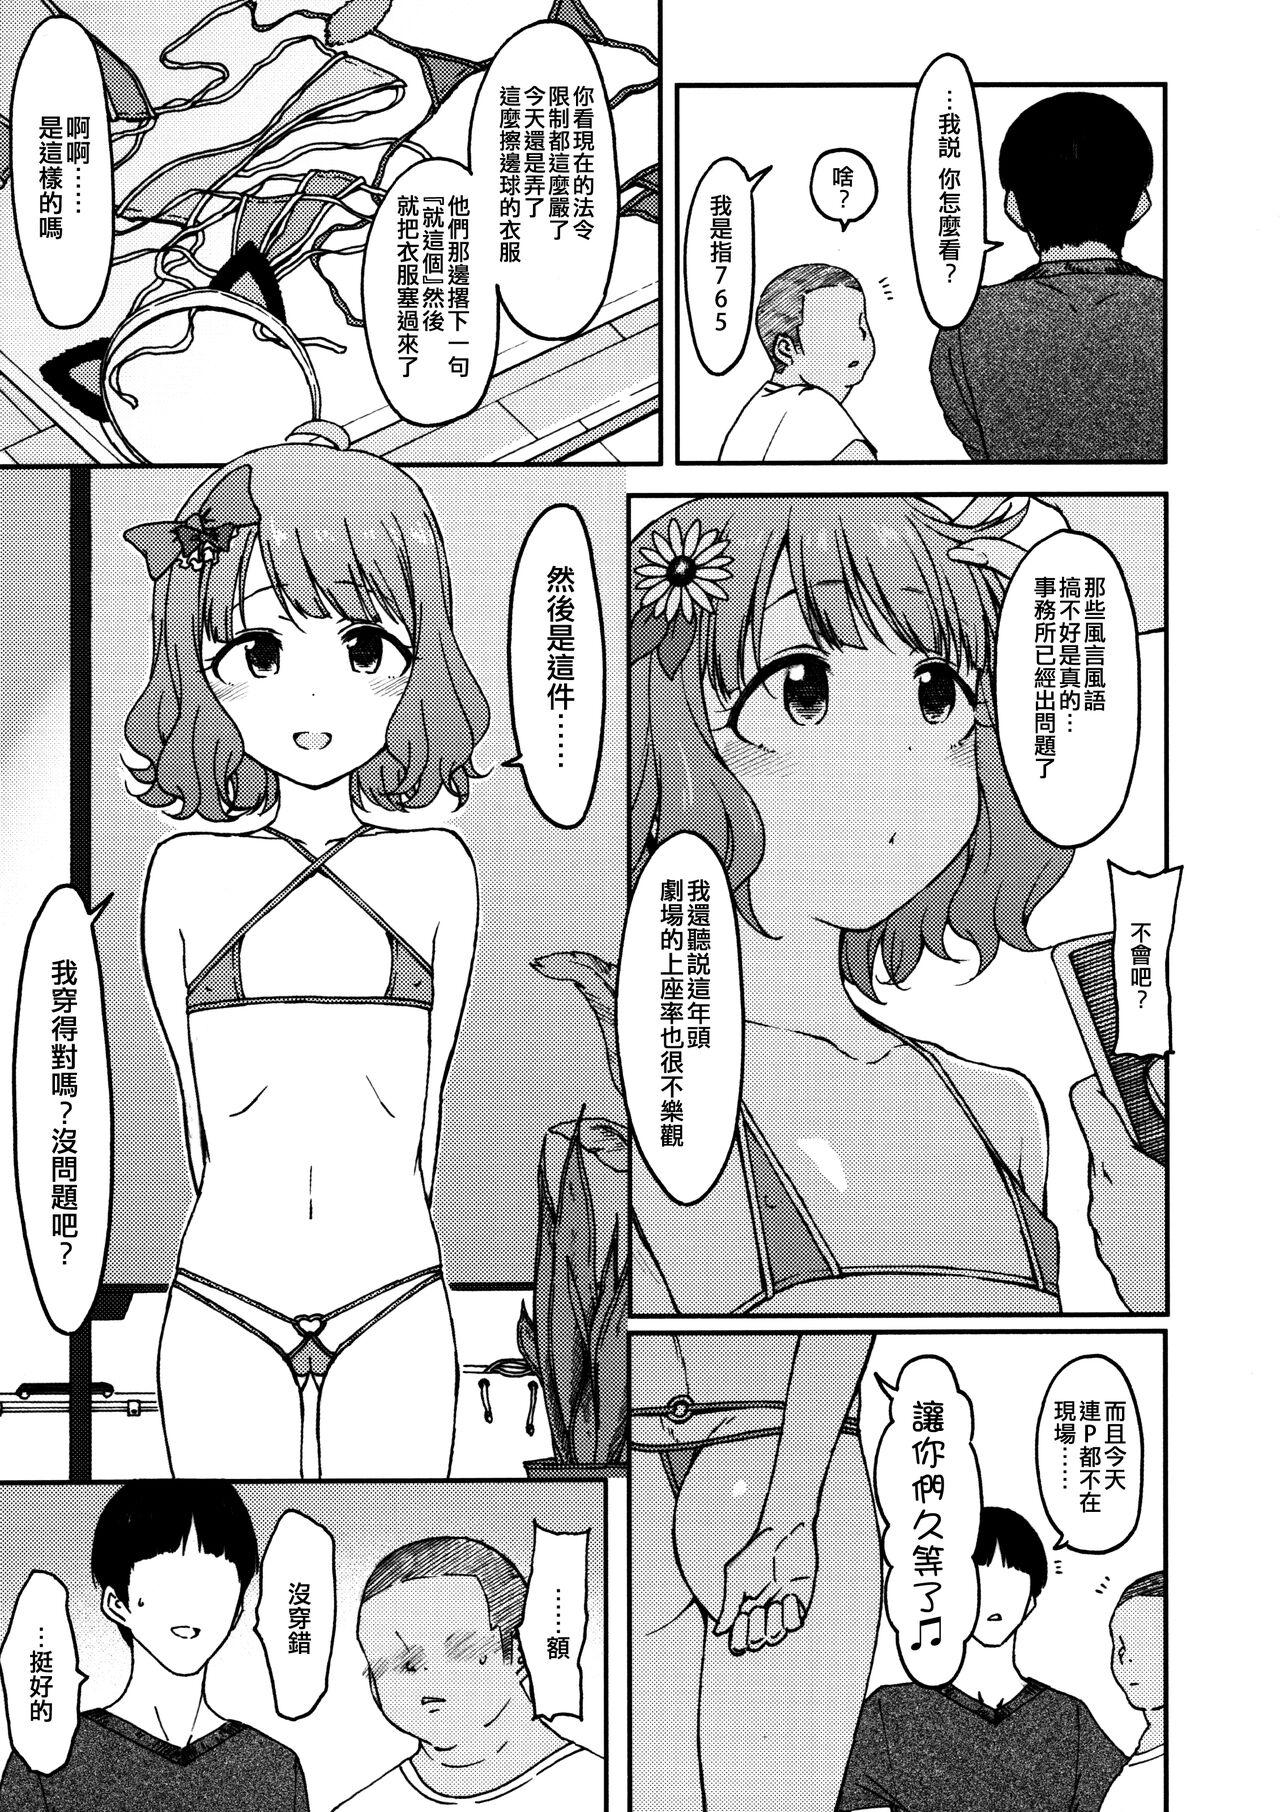 Fun Candy Wrapper - The idolmaster Panty - Page 6